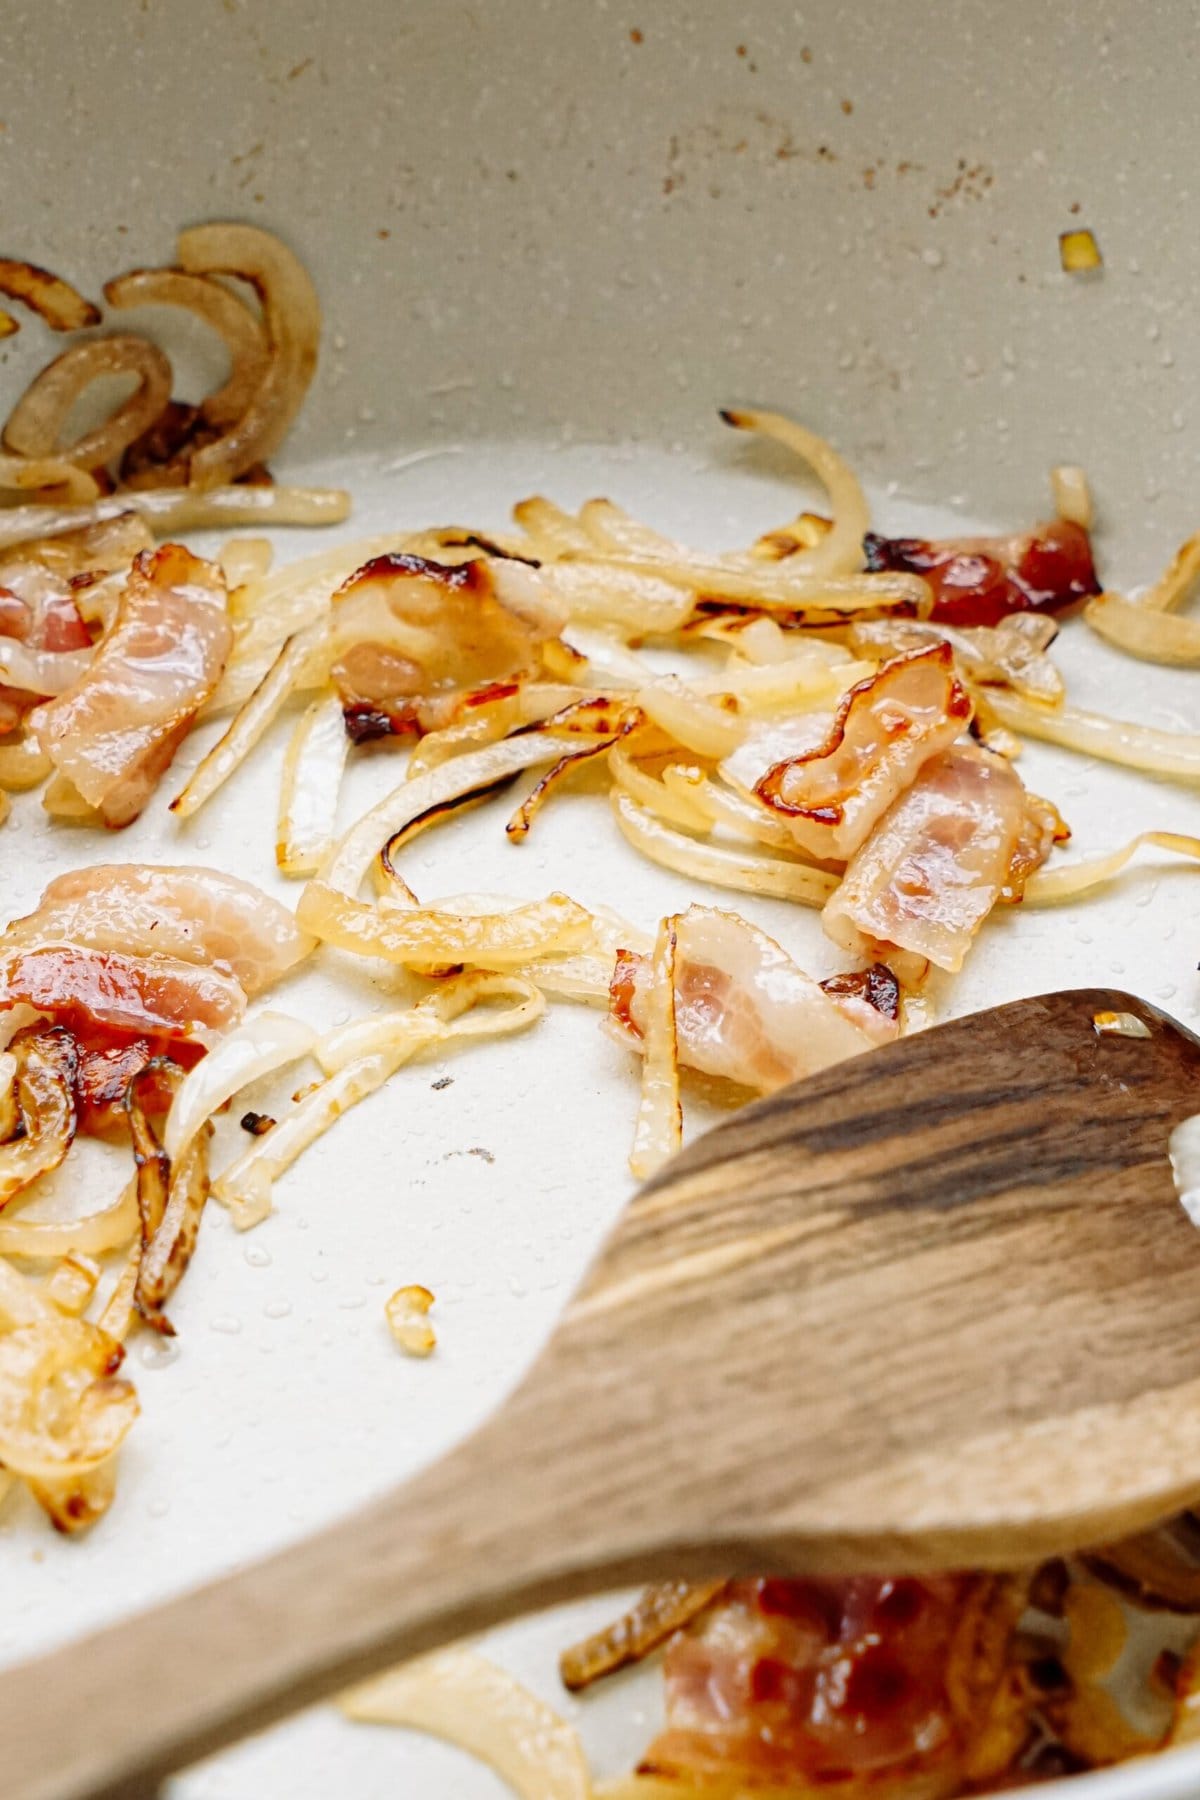 Bacon and onions in a pan with a wooden spoon.